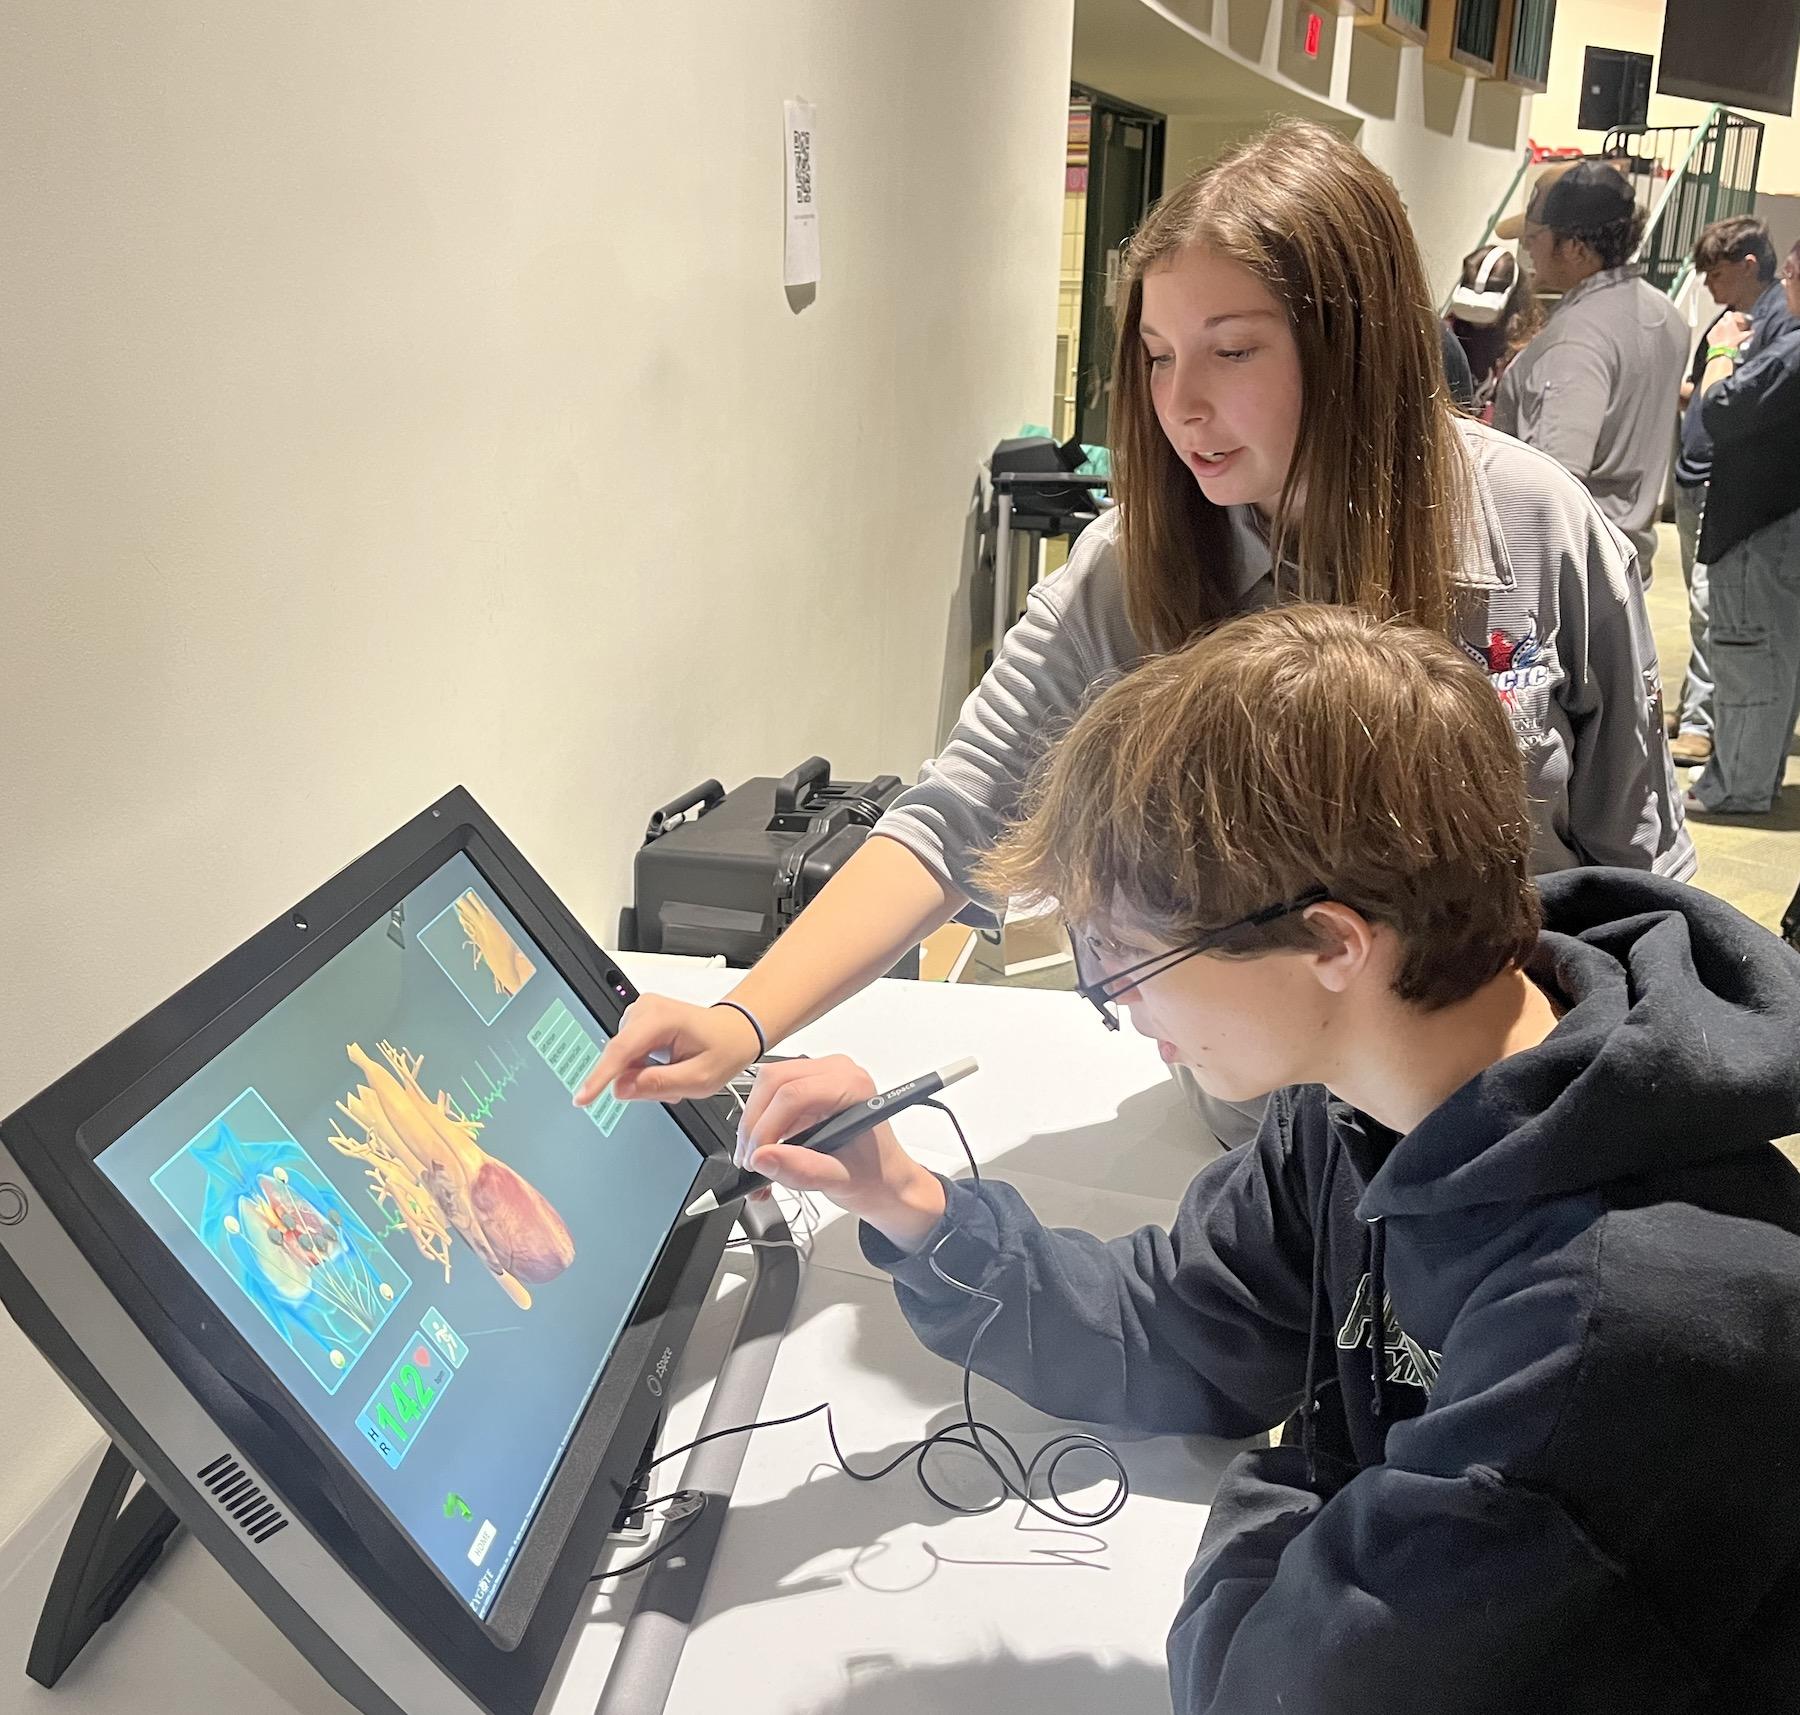 Lizzie Noble directs one of the freshmen on how to use a hands-on computer application